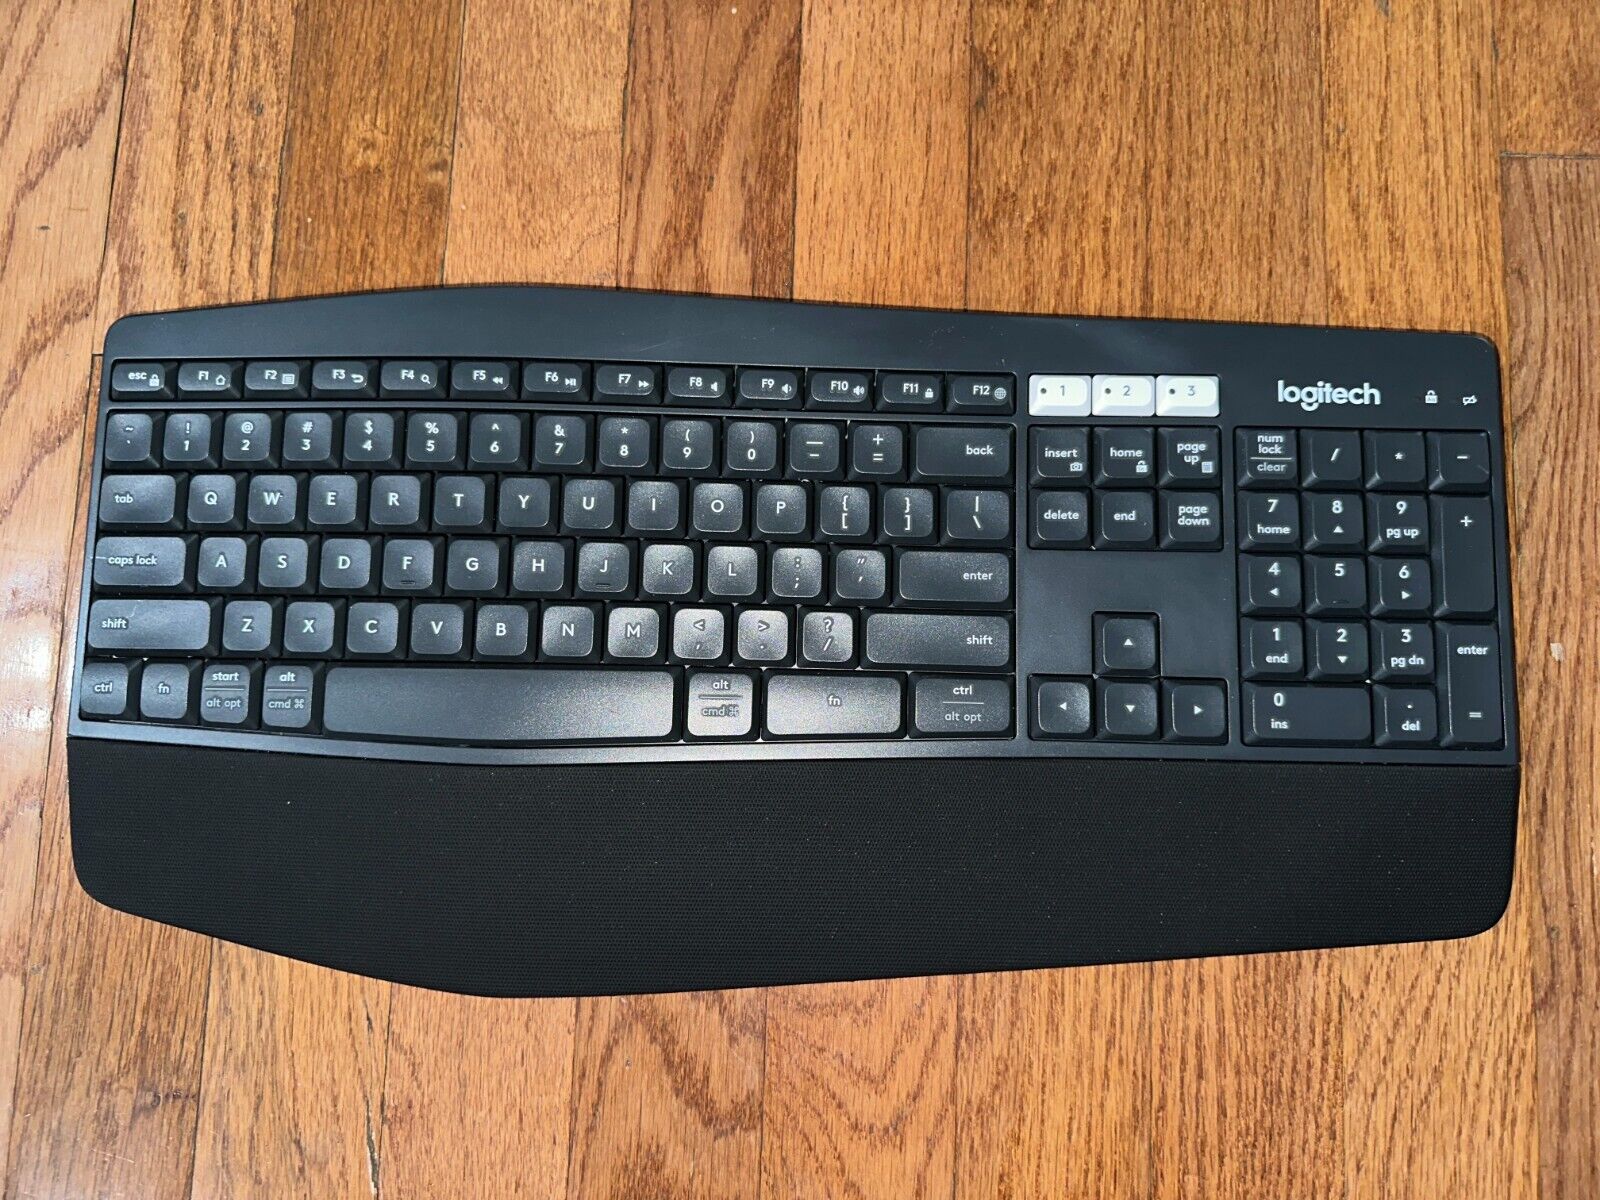 Logitech K850 Keyboard - Used, but clean and tested